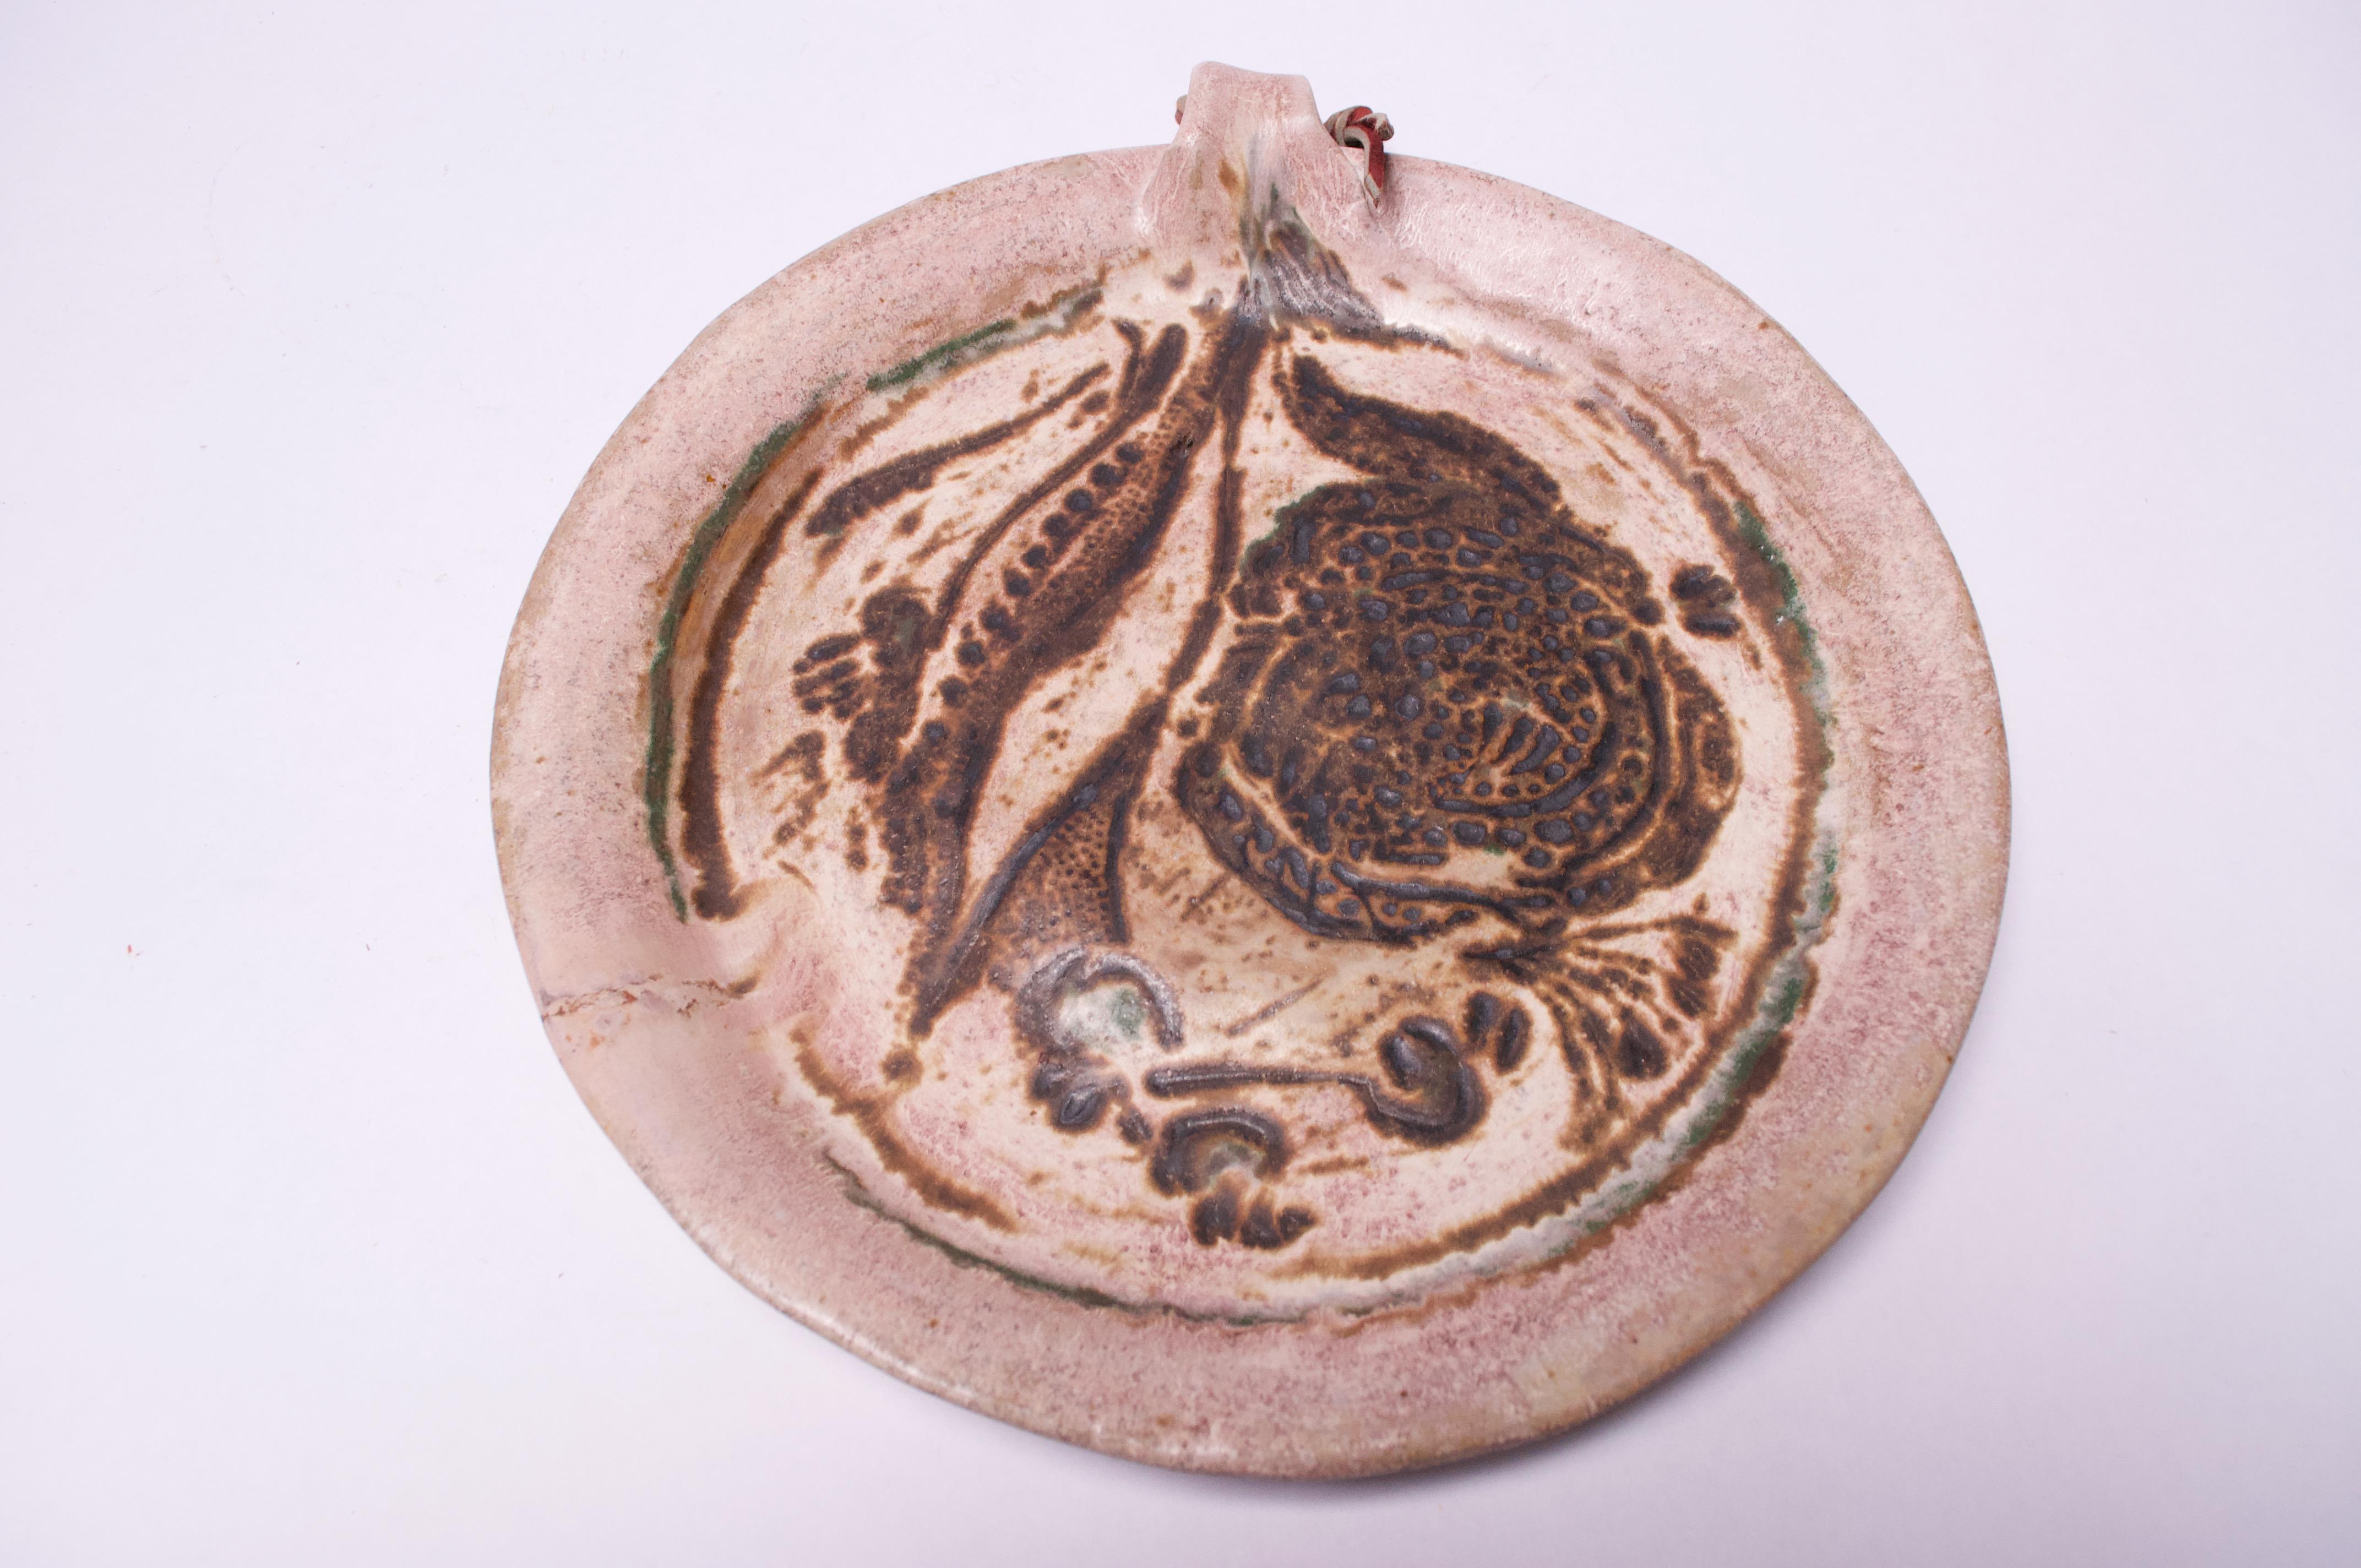 Attractive stoneware charger / decorative plate in muted palette of pale pink and brown with pops of green and a strip of red leather attached to the handle. Nice textural elements present (the floral design is composed largely of small dots /